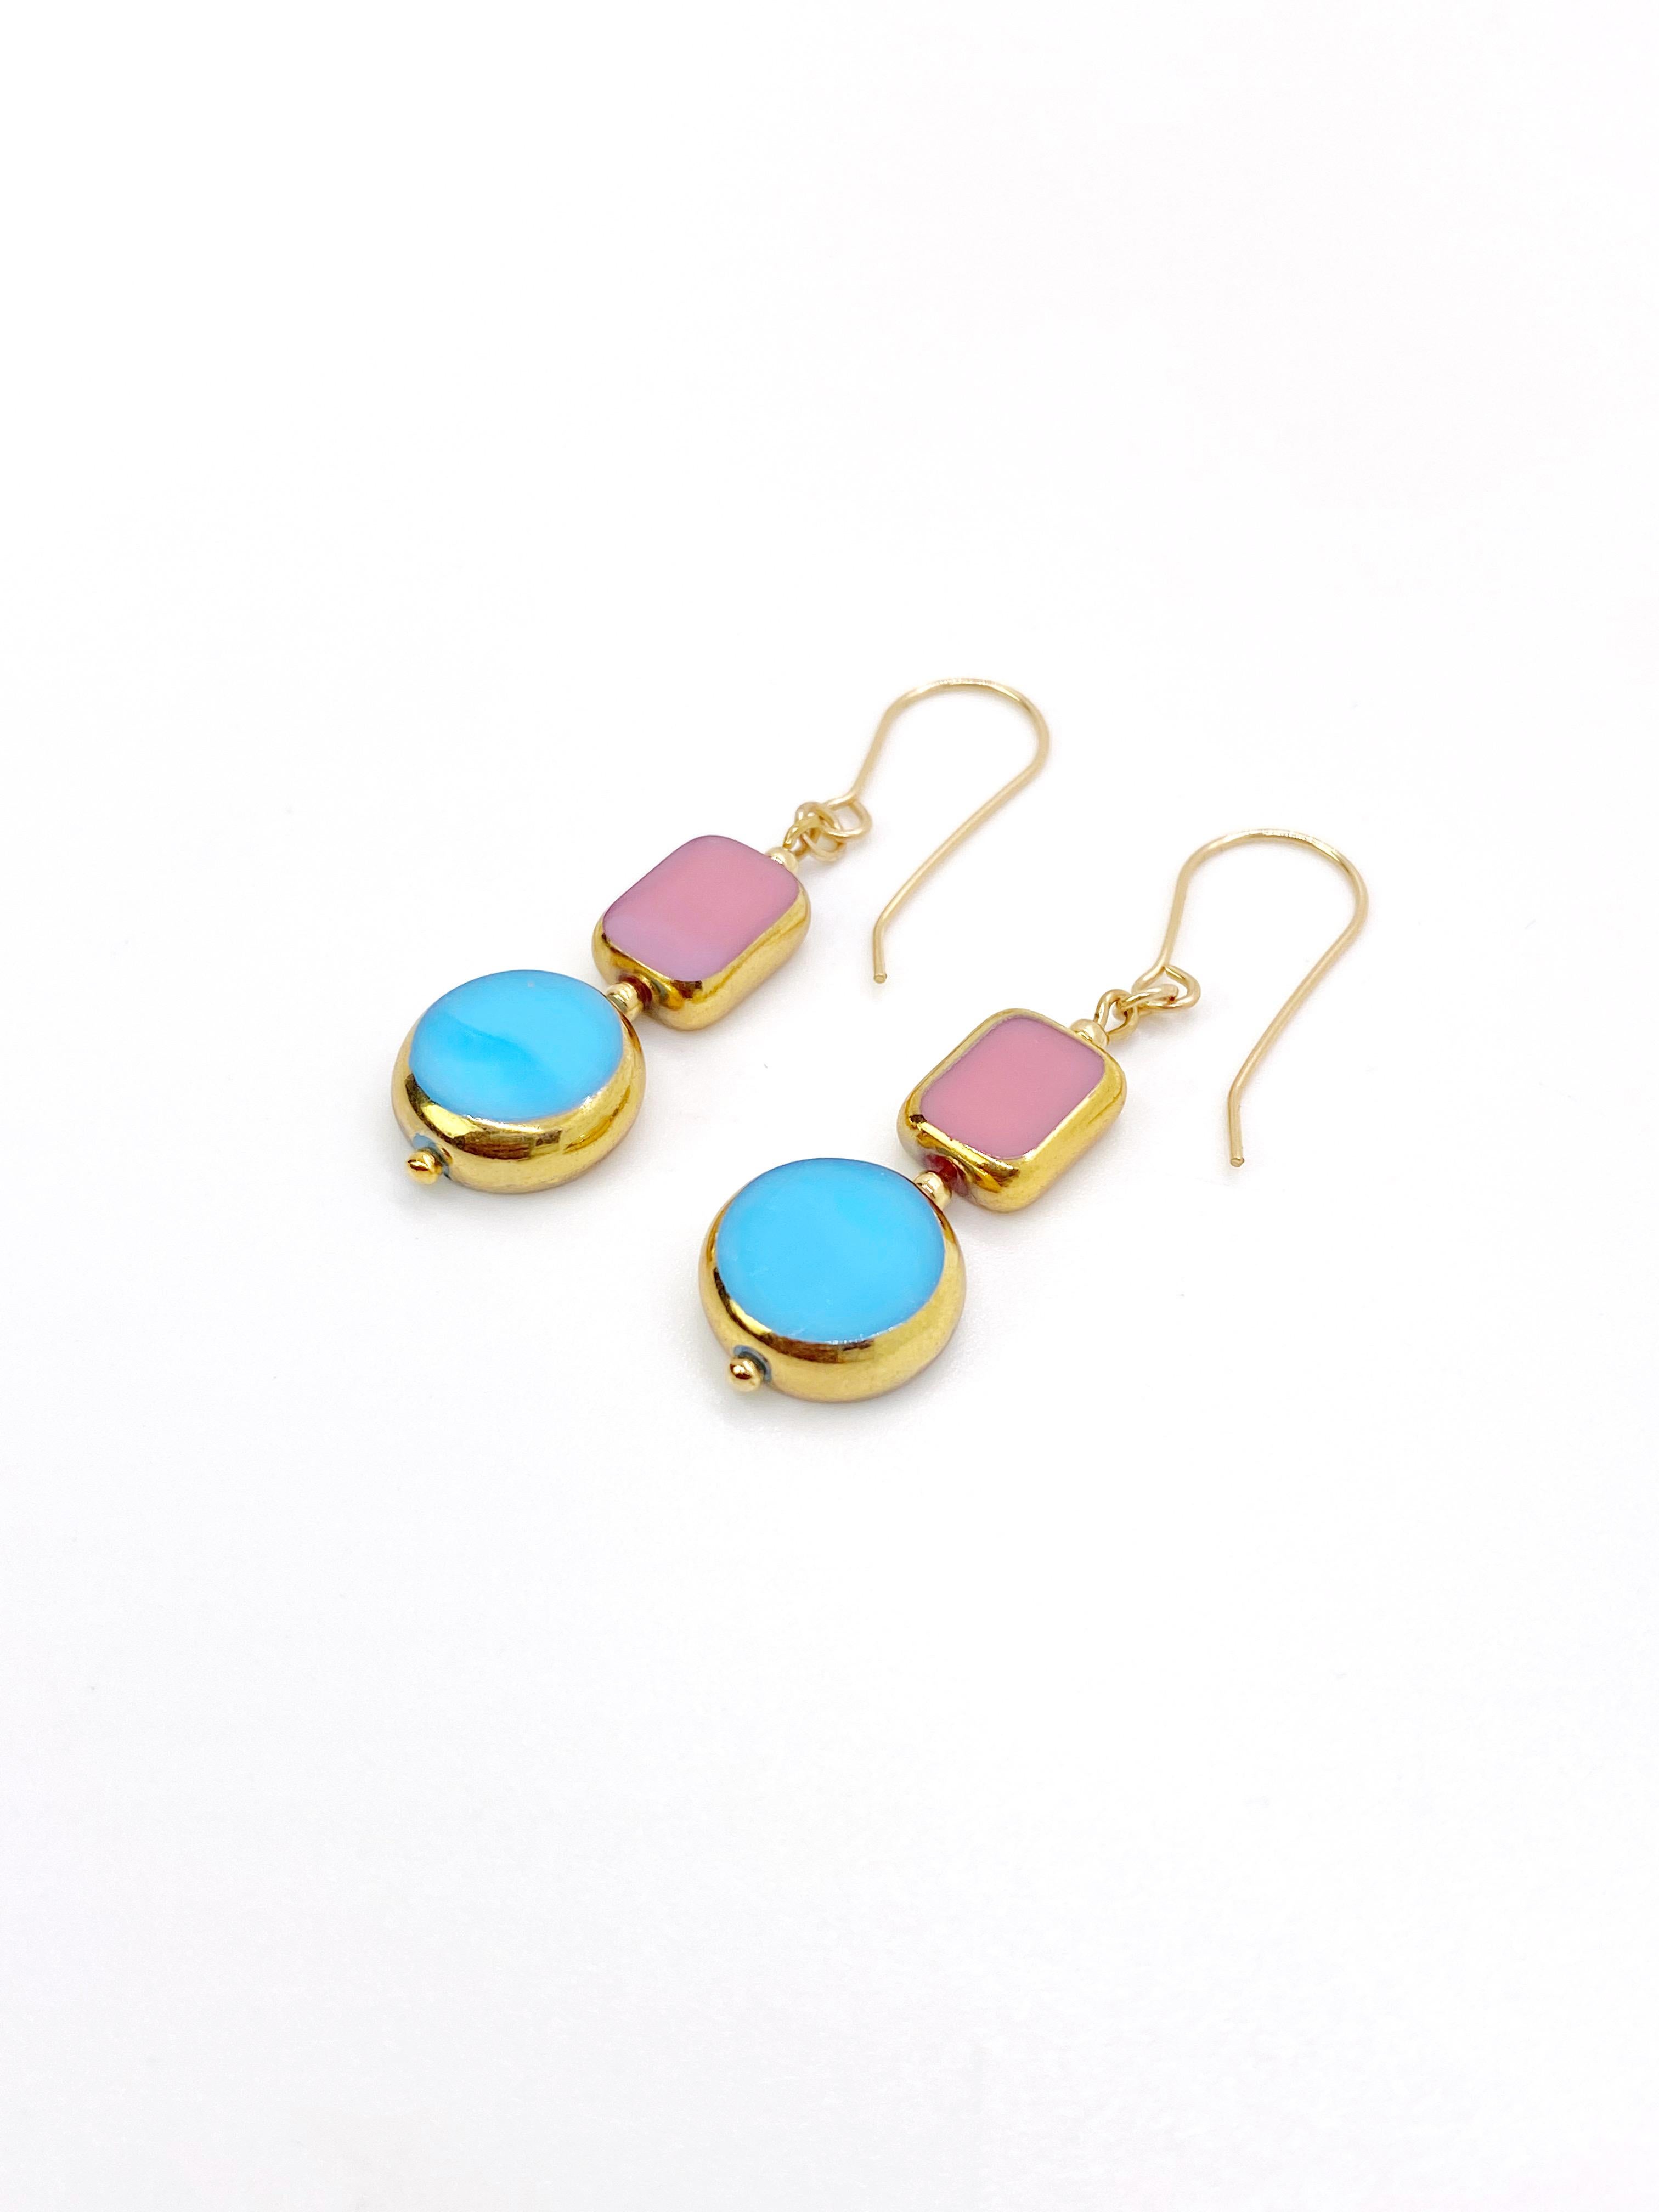 Retro Vintage German Glass Beads edged with 24K gold Blue & Pink Art Deco Earrings For Sale